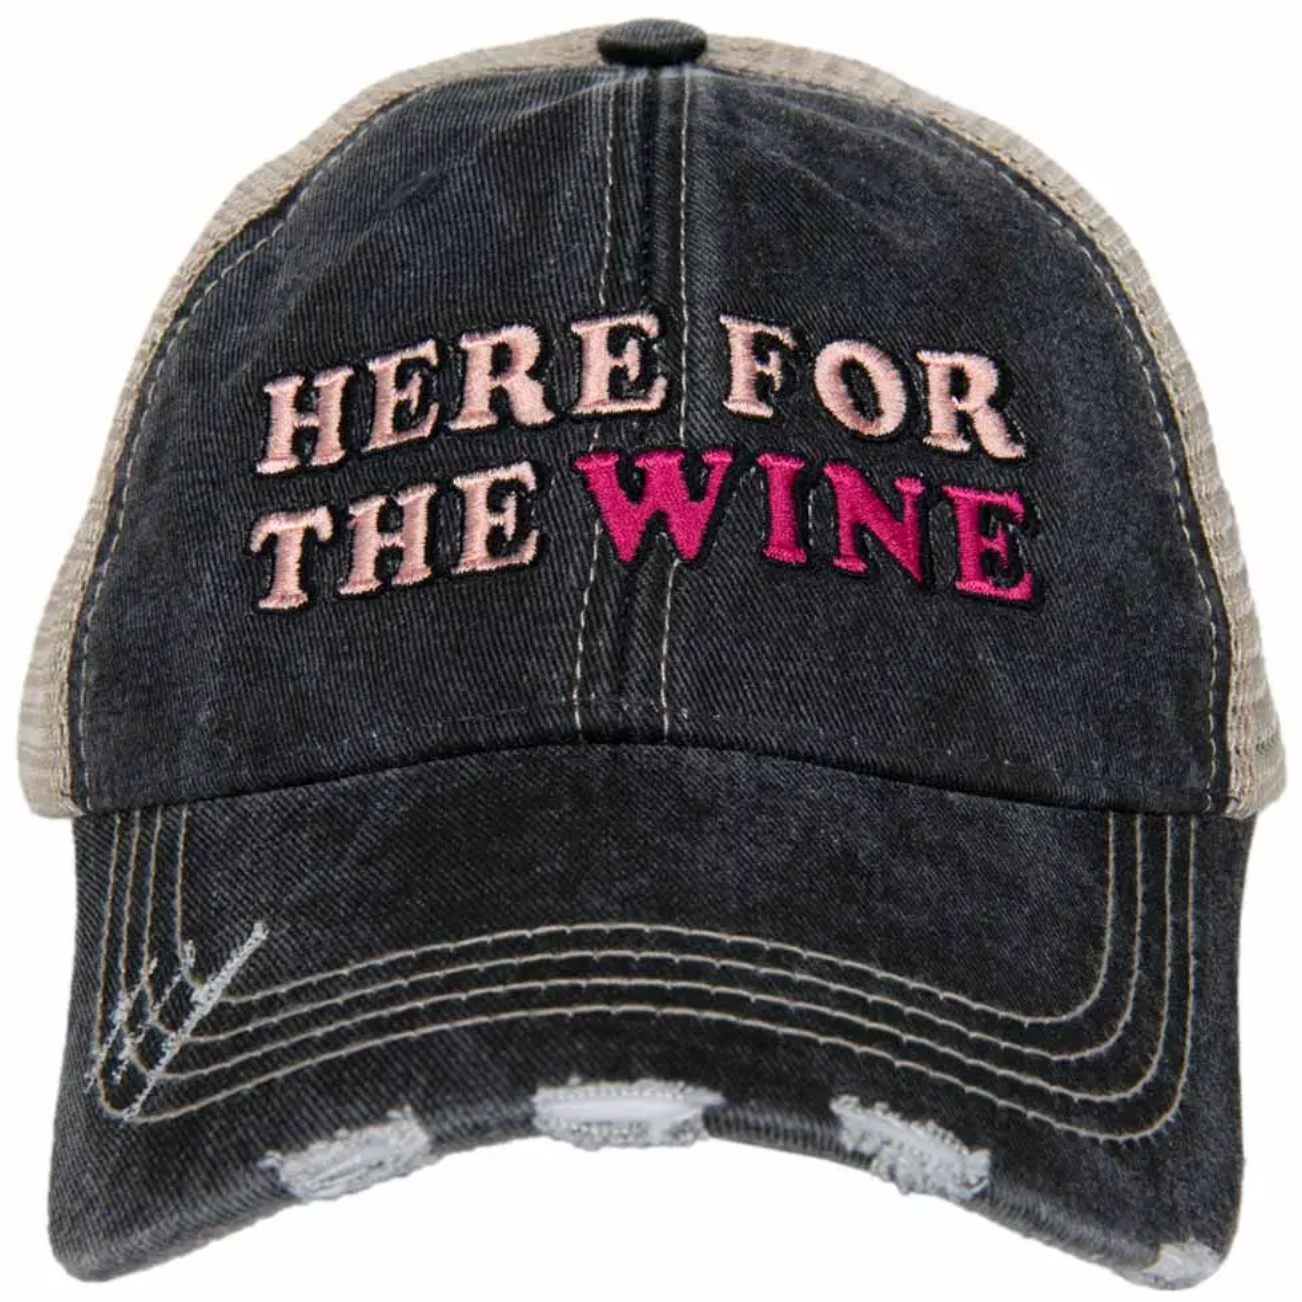 Here for the WINE Trucker Hat by Katydid